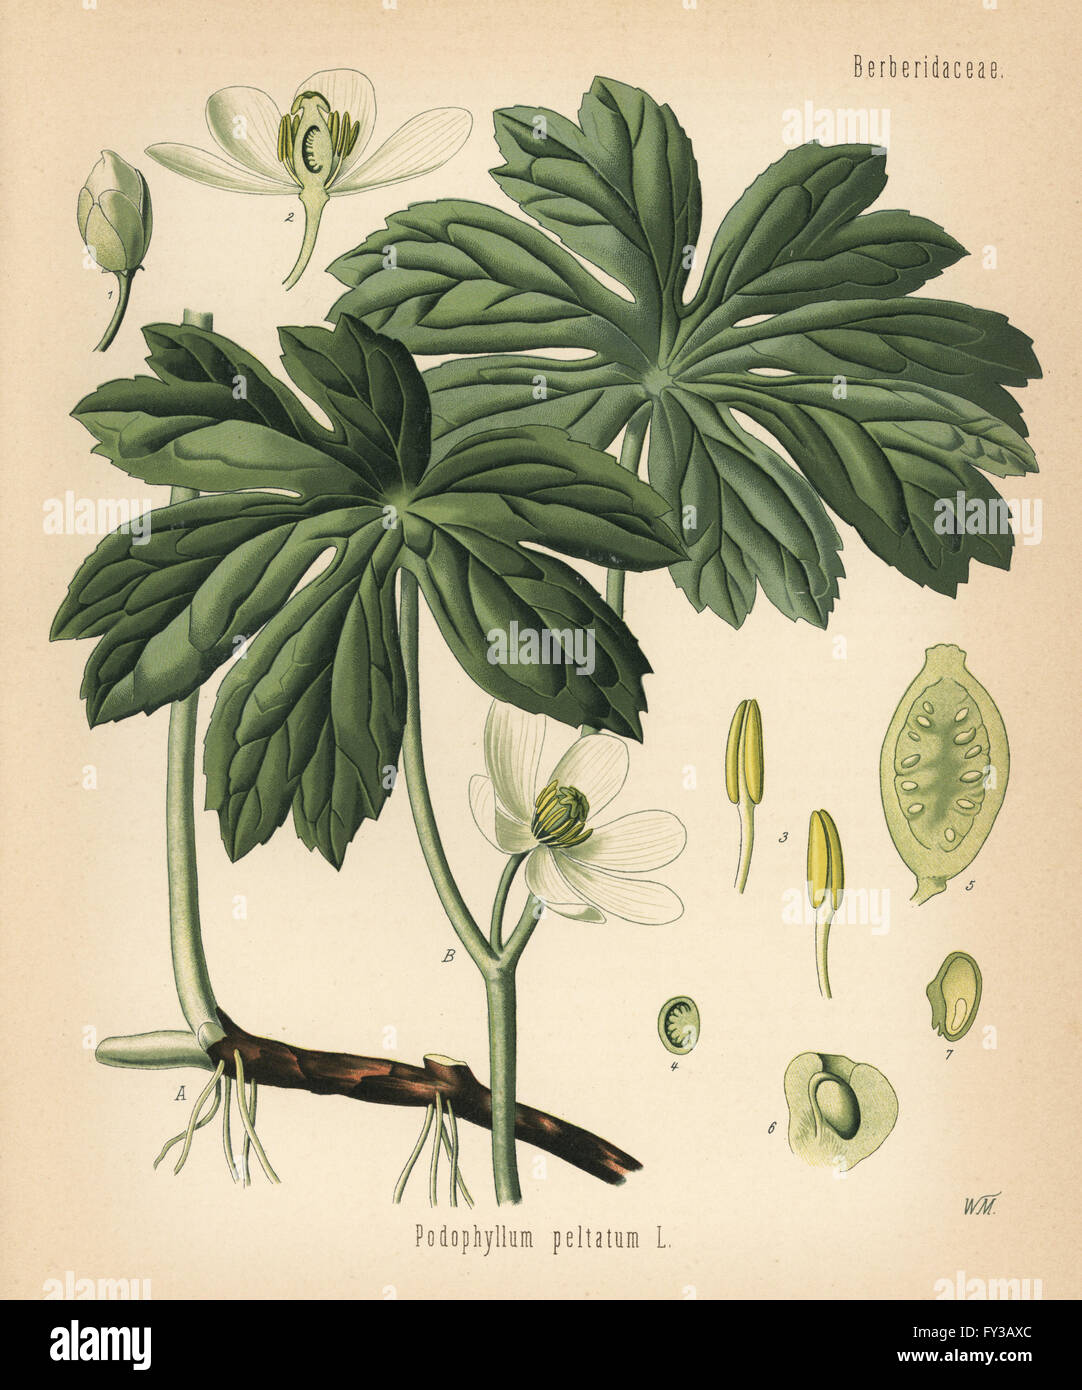 Mayapple or American mandrake, Podophyllum peltatum. Chromolithograph after a botanical illustration by Walther Muller from Hermann Adolph Koehler's Medicinal Plants, edited by Gustav Pabst, Koehler, Germany, 1887. Stock Photo